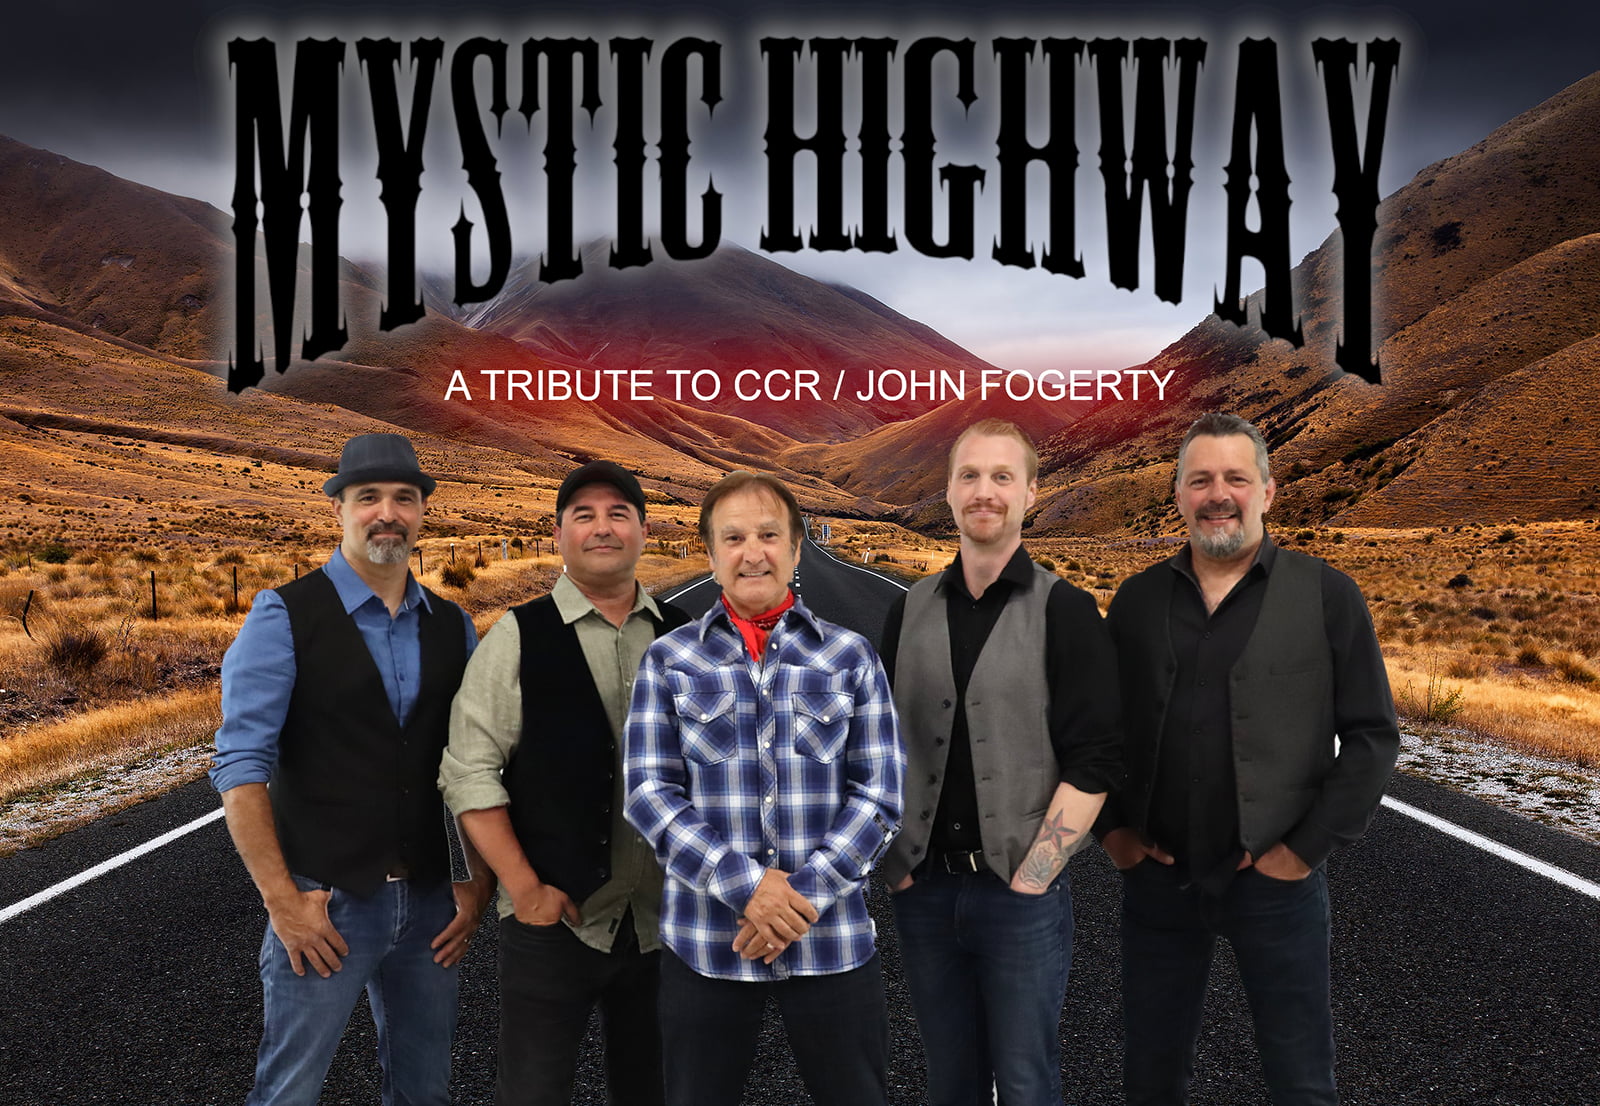 A Tribute to CCR and John Fogerty